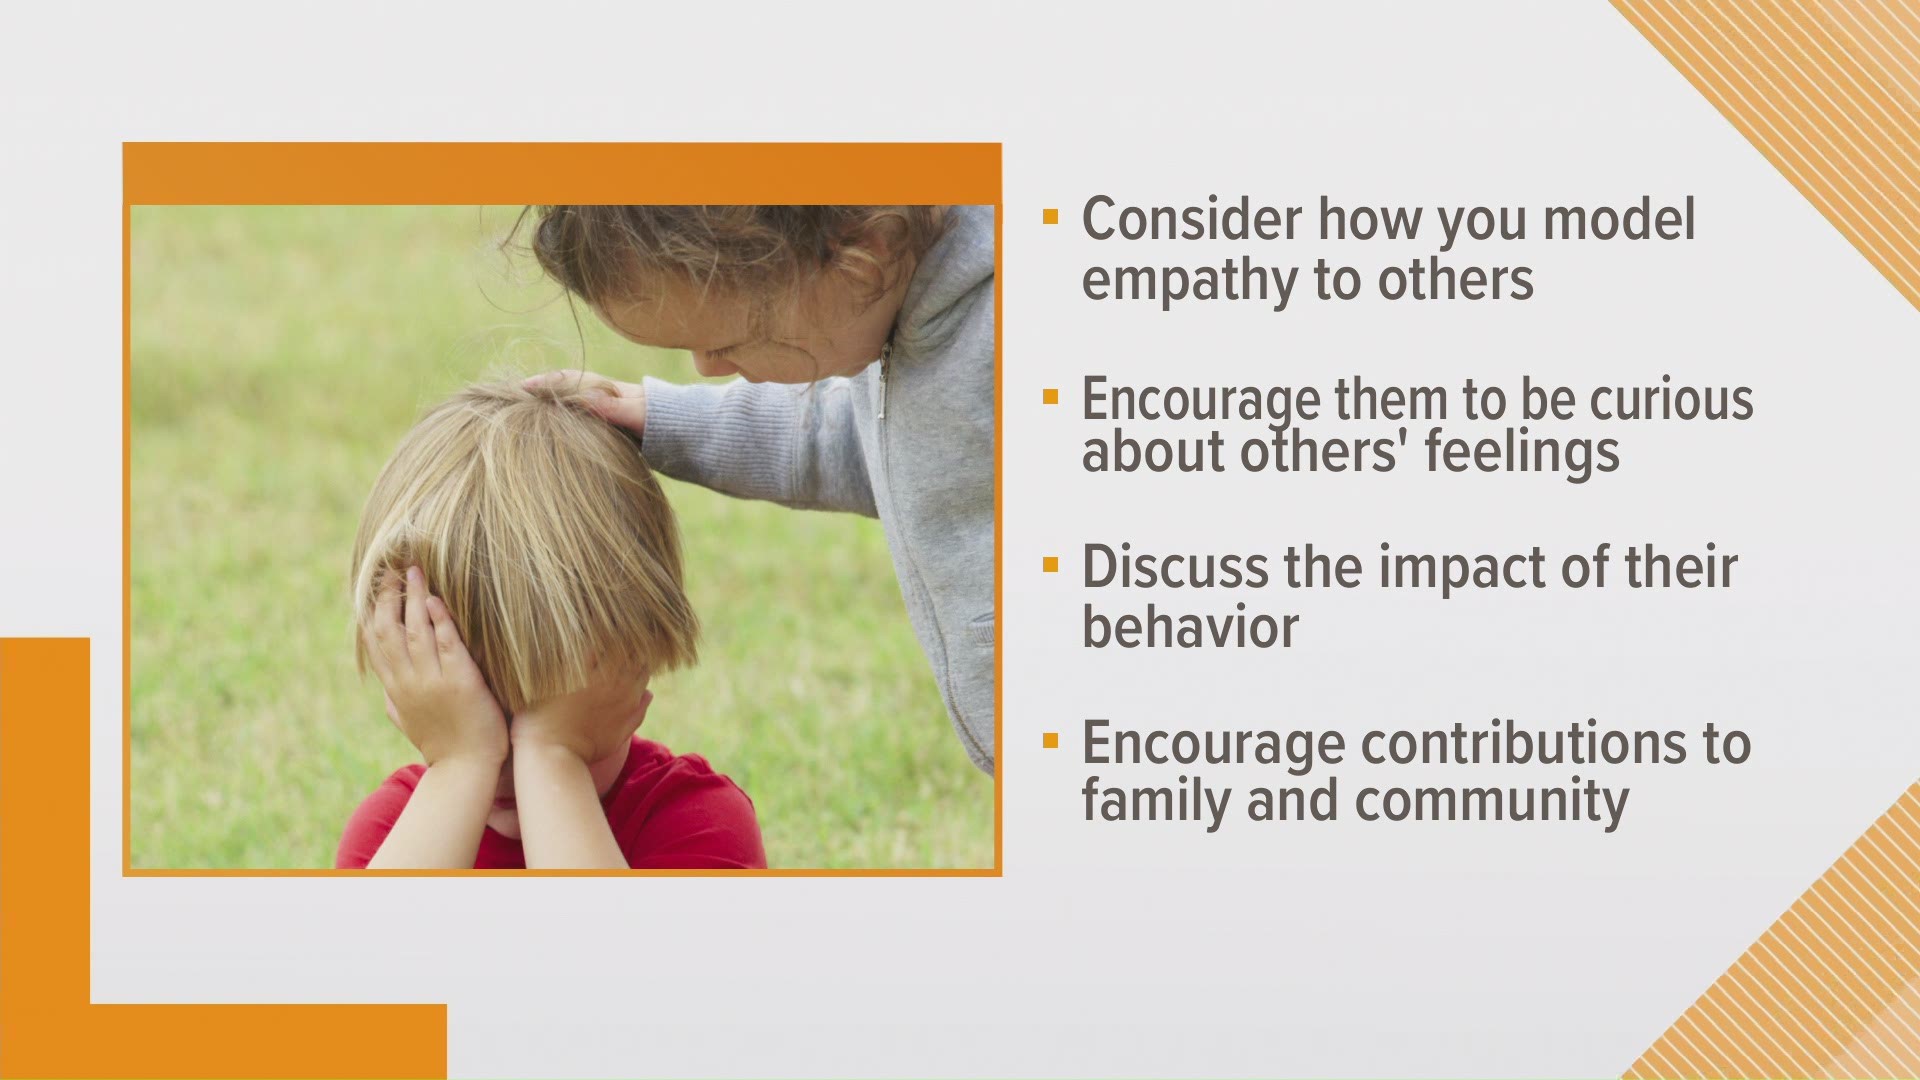 The Parenting Center gives tips to help your child strengthen empathy